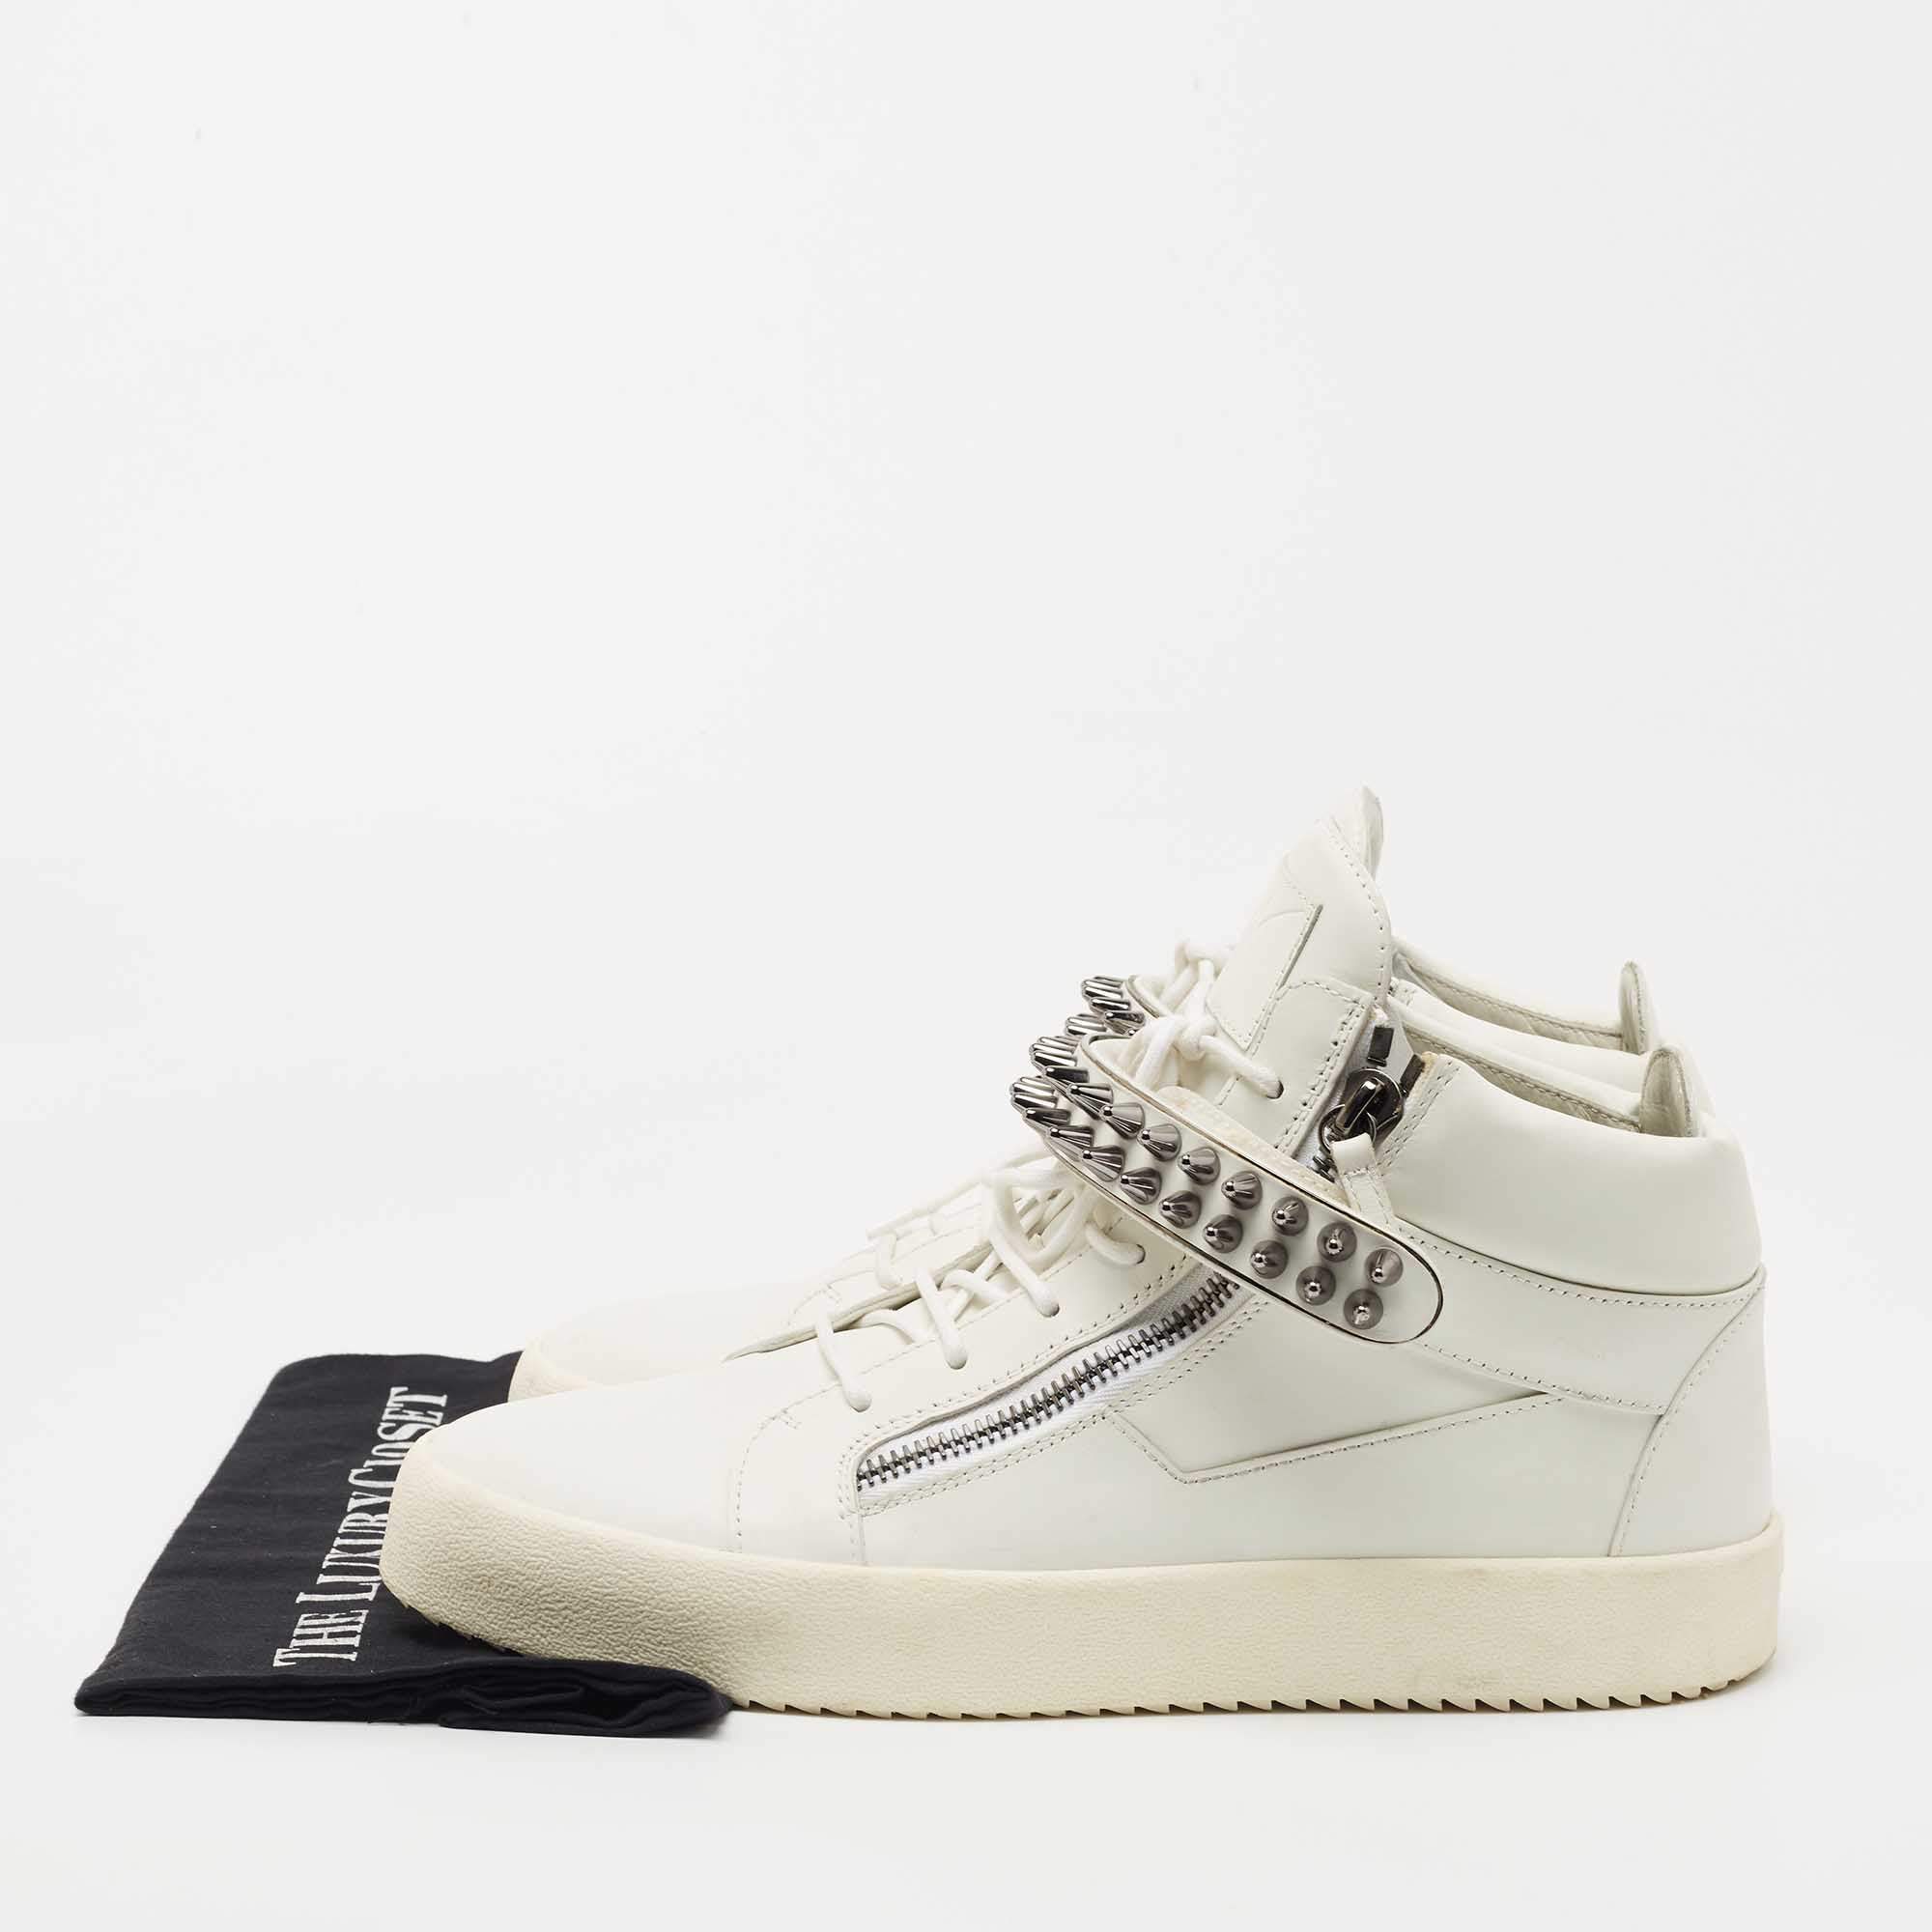 Giuseppe Zanotti White Leather Chain High Top Sneakers Size, 44% OFF